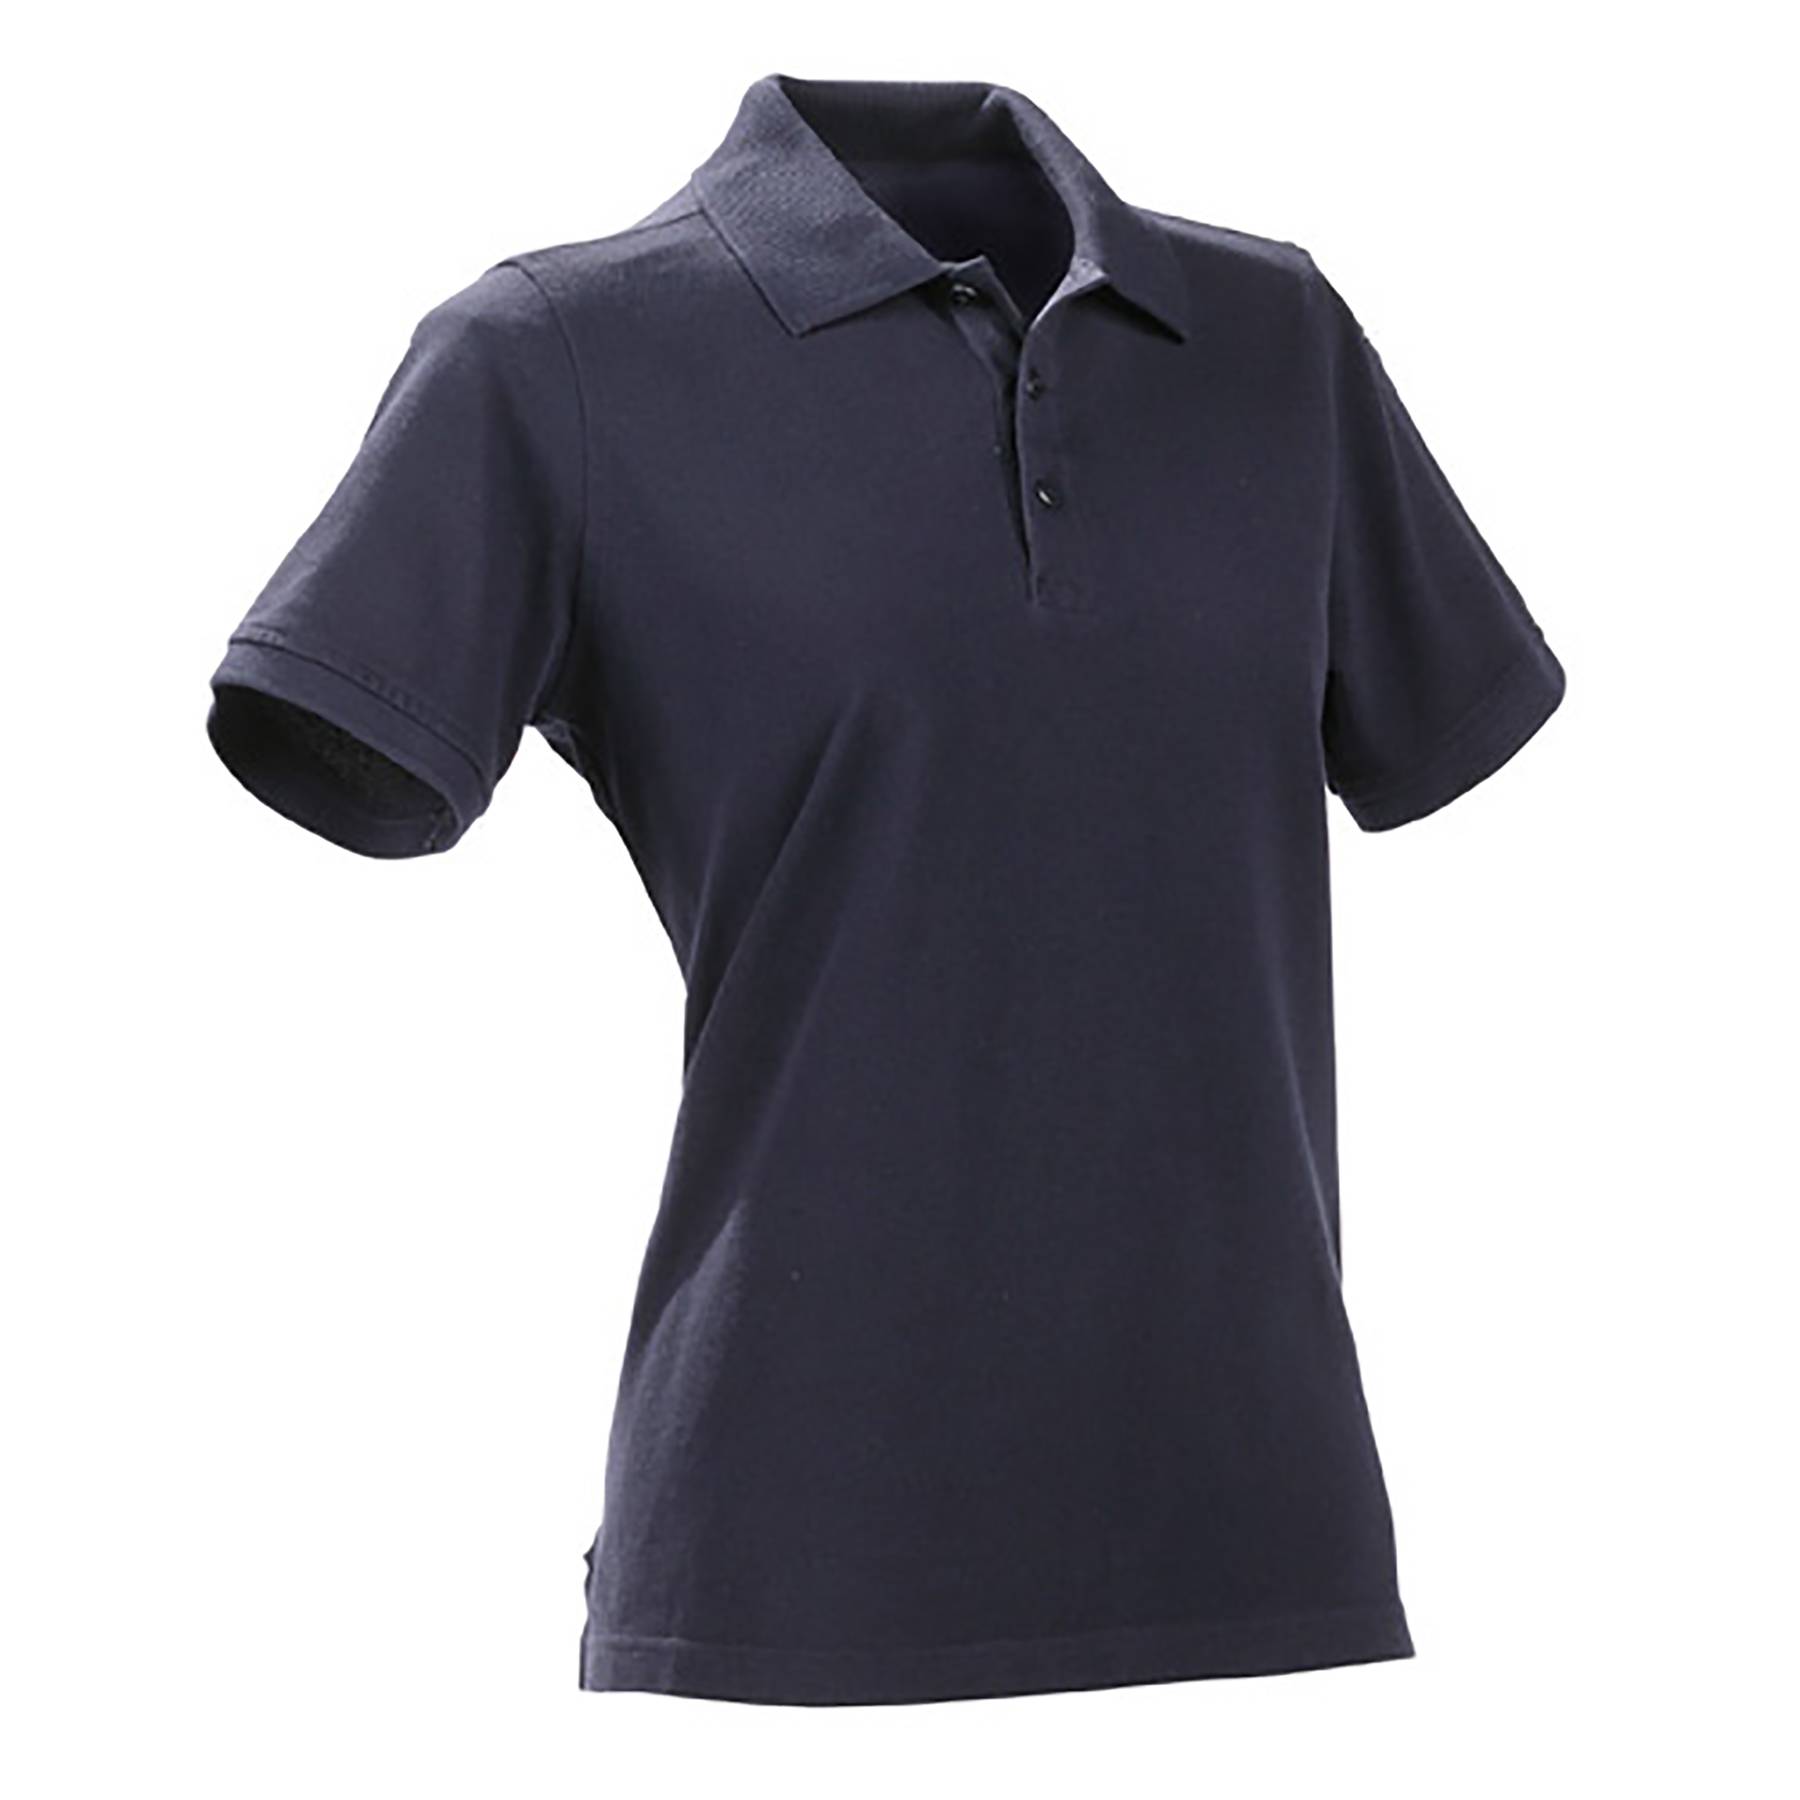 5.11 TACTICAL WOMEN'S PROFESSIONAL POLO